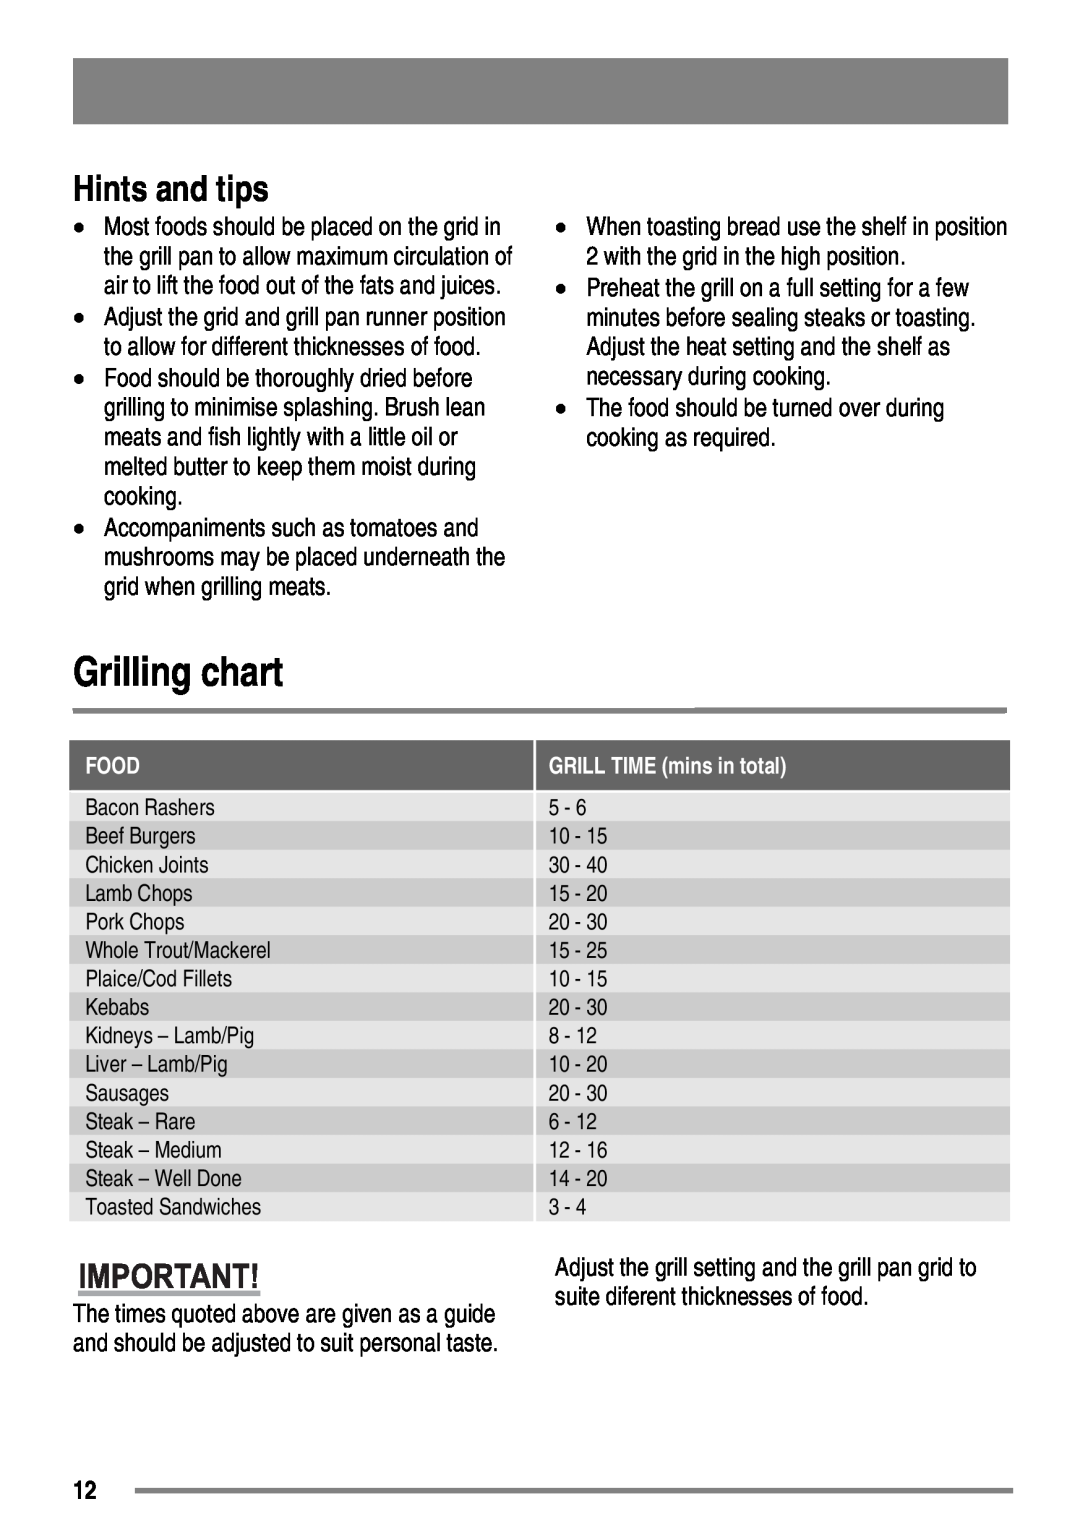 Zanussi ZKG5020 Grilling chart, The food should be turned over during cooking as required, Food, GRILL TIME mins in total 